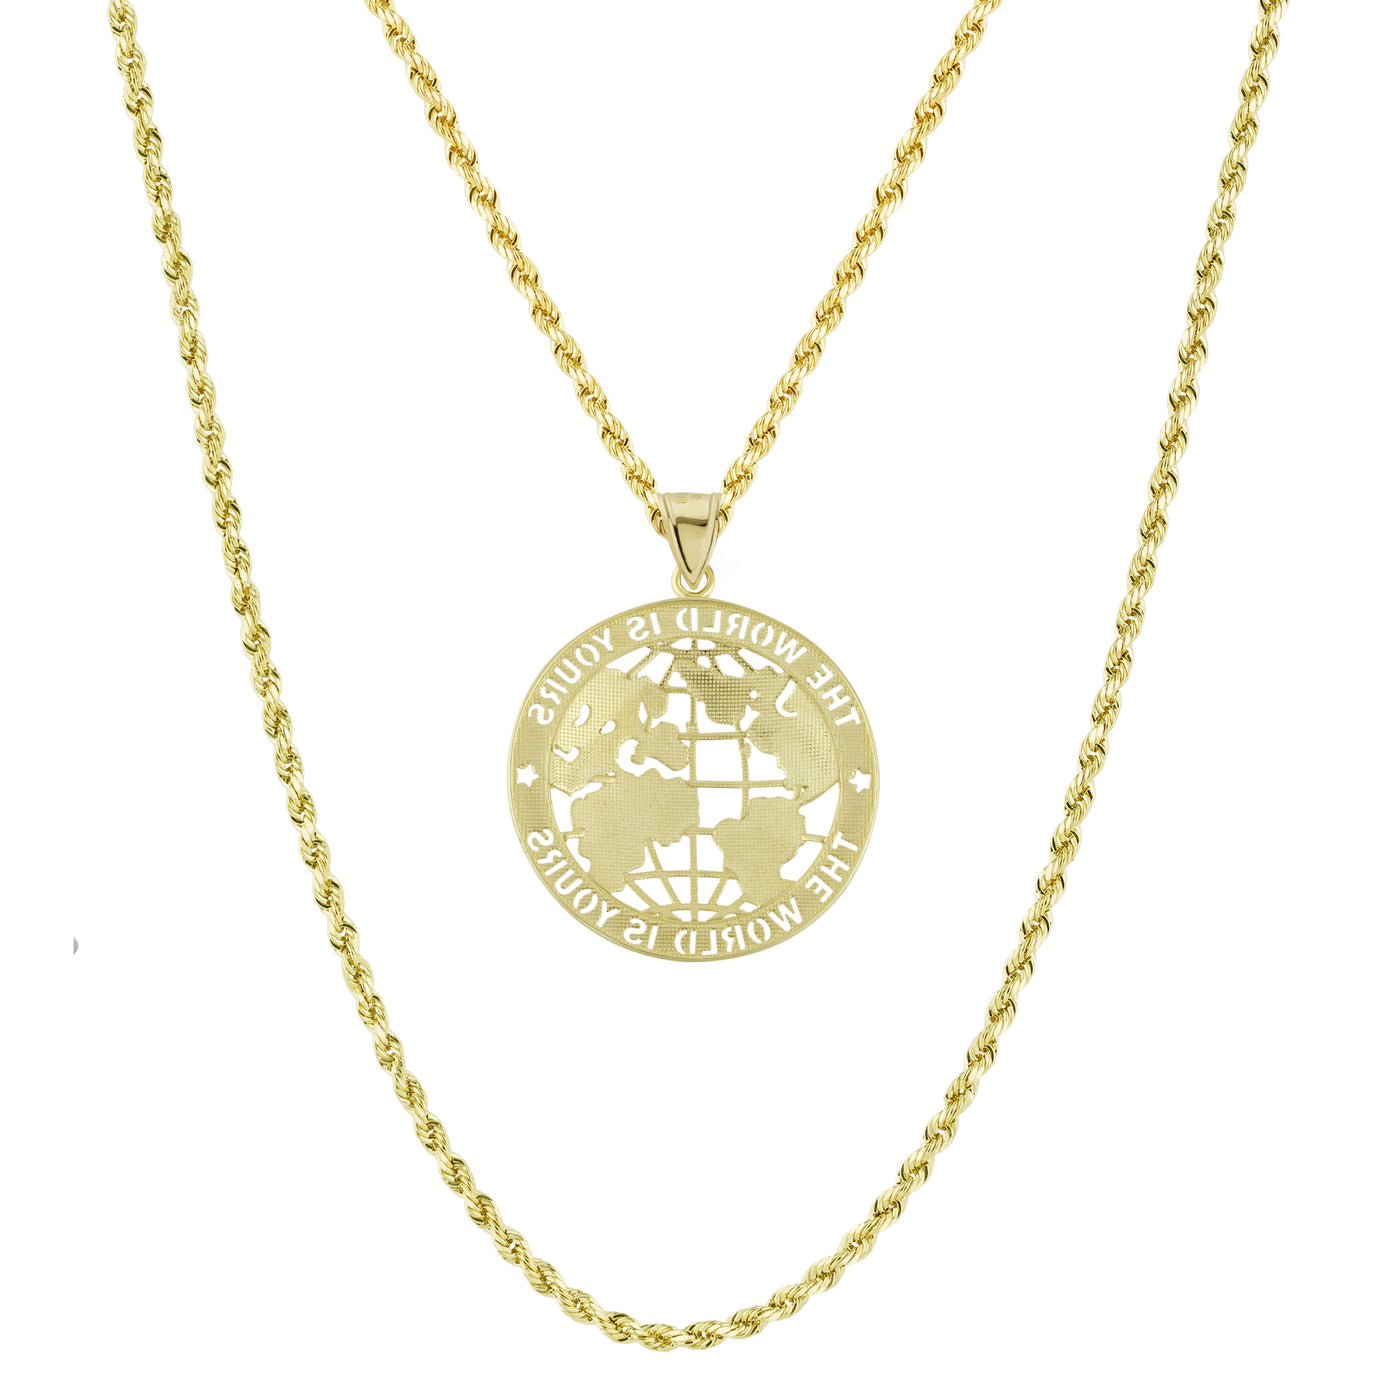 1 3/4" Two-Tone "The World is Yours" Pendant & Chain Necklace Set 10K Yellow White Gold